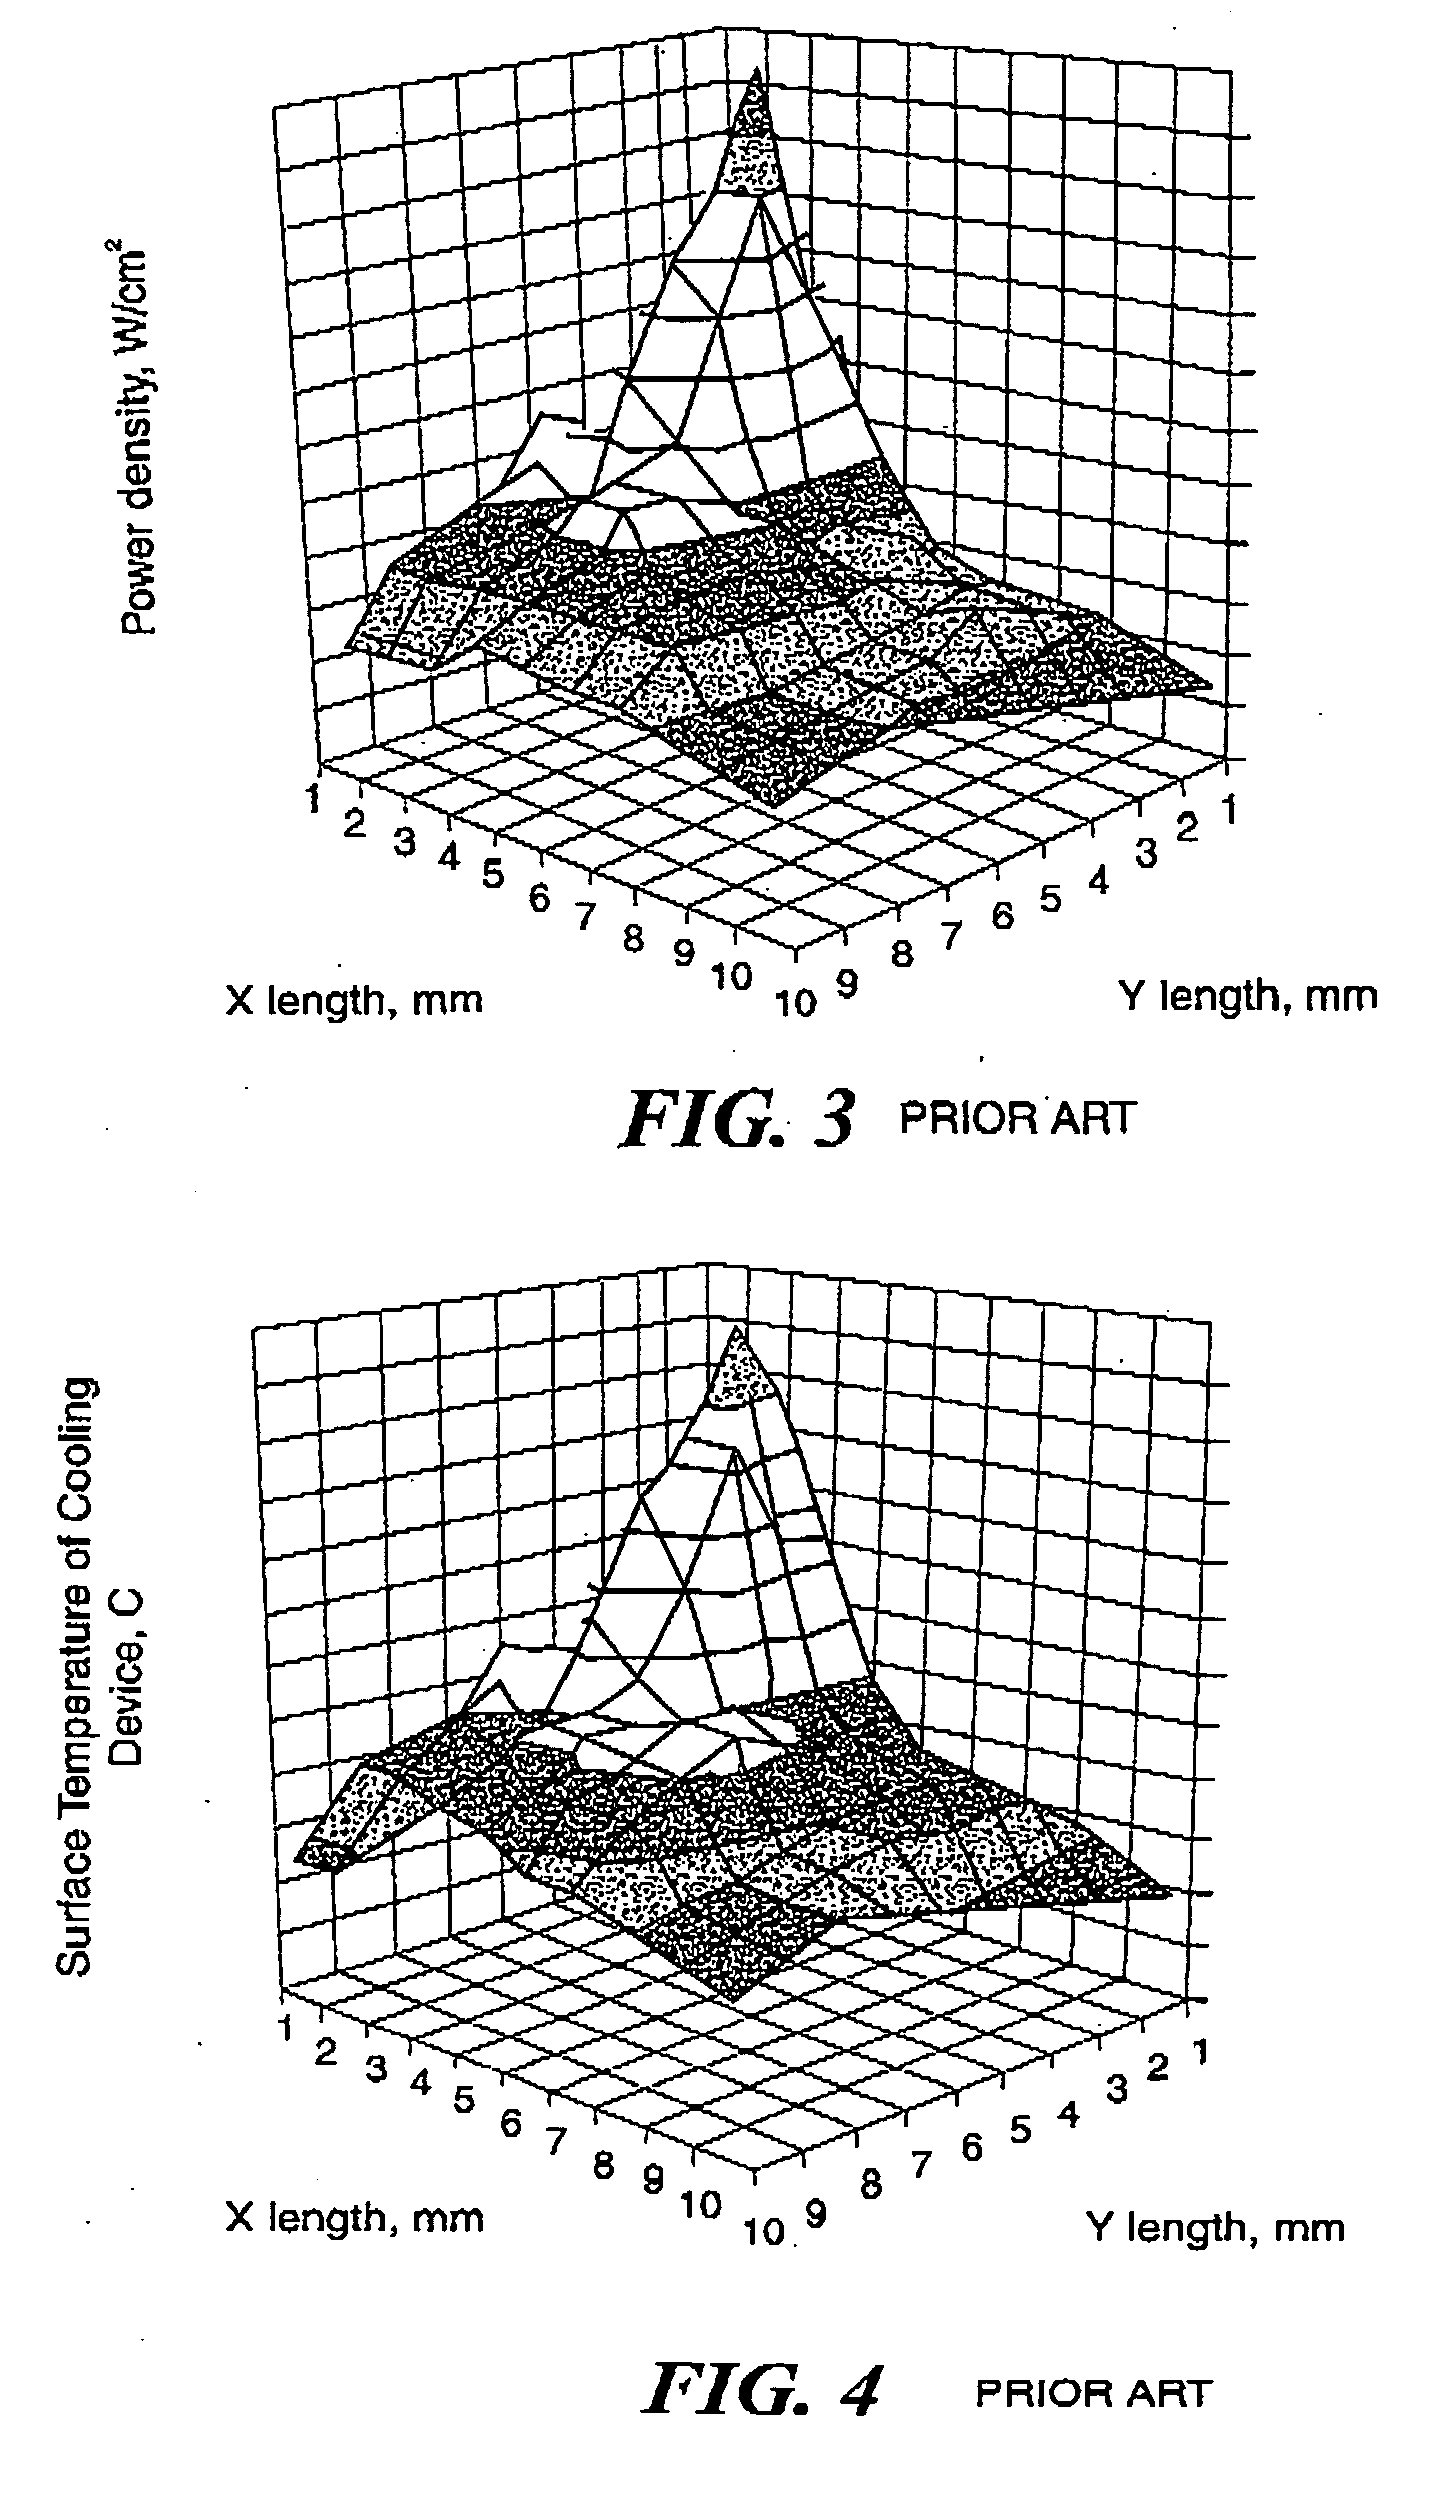 Method and apparatus for thermal characterization under non-uniform heat load